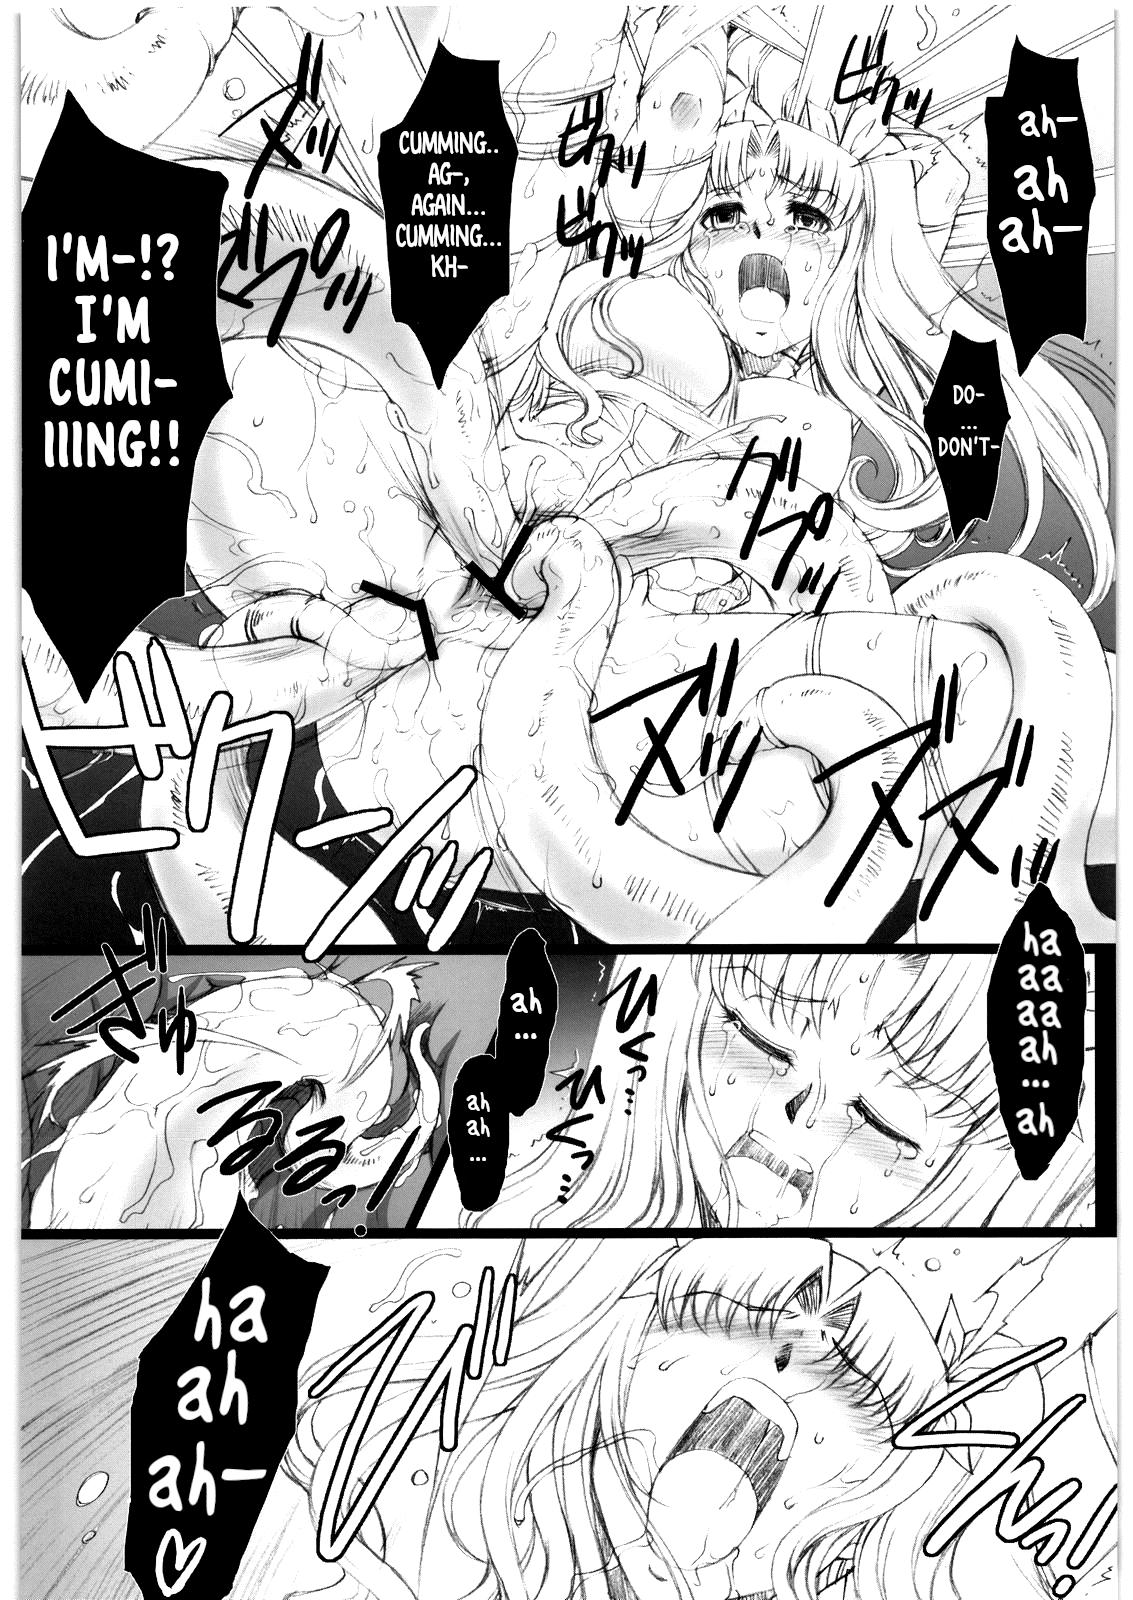 Student Red Degeneration - Fate stay night Boss - Page 5